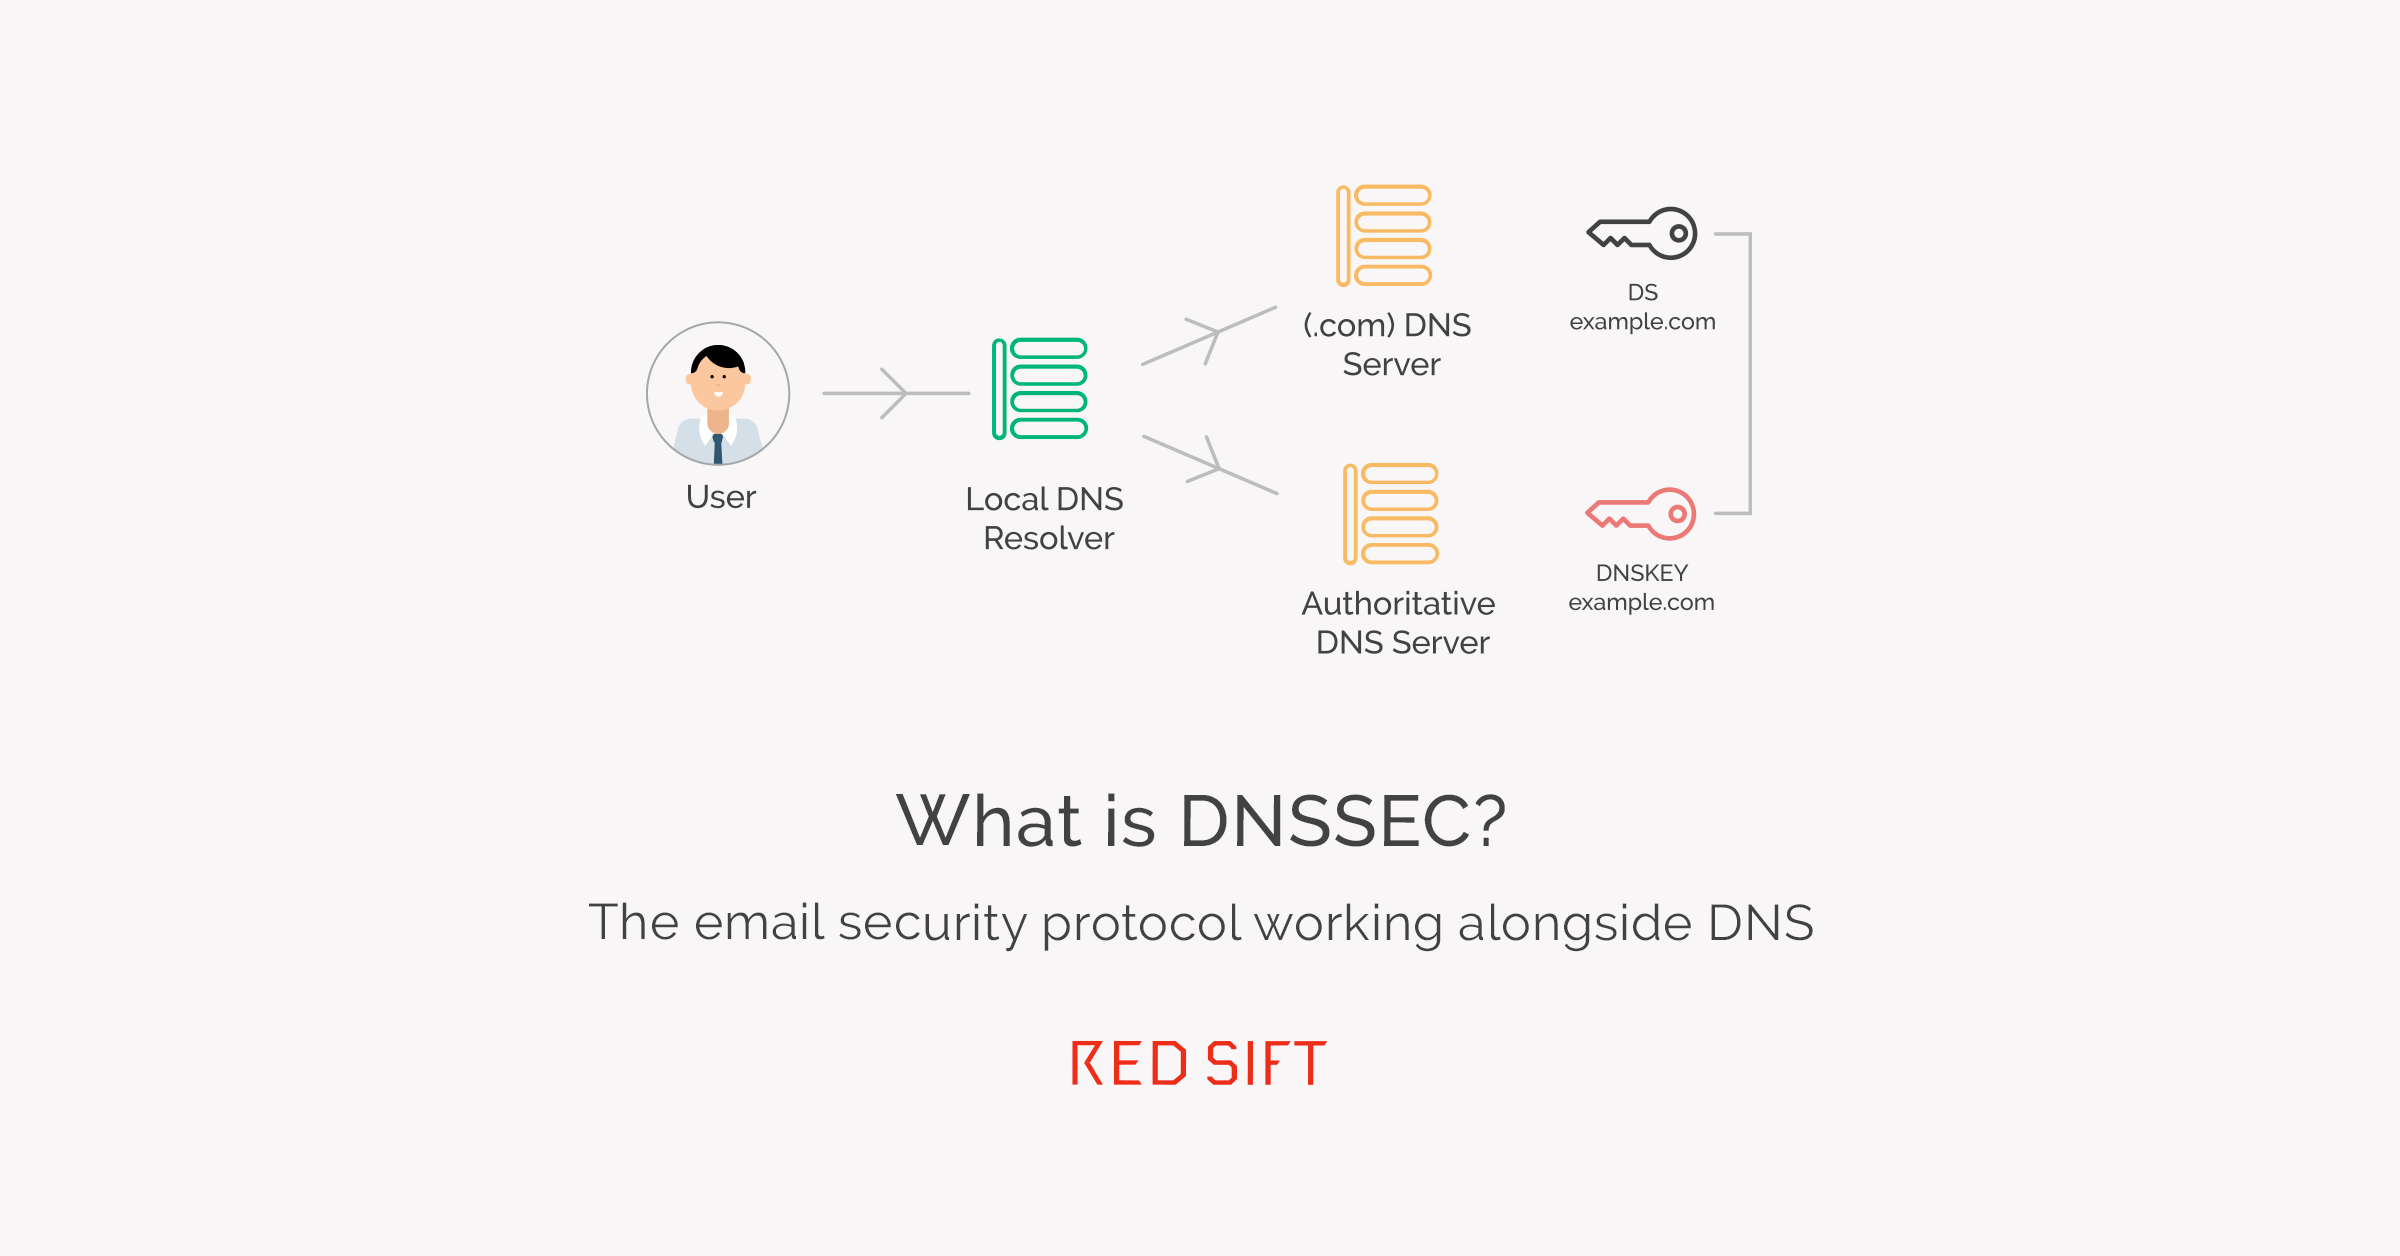 DNSSEC email security protocol